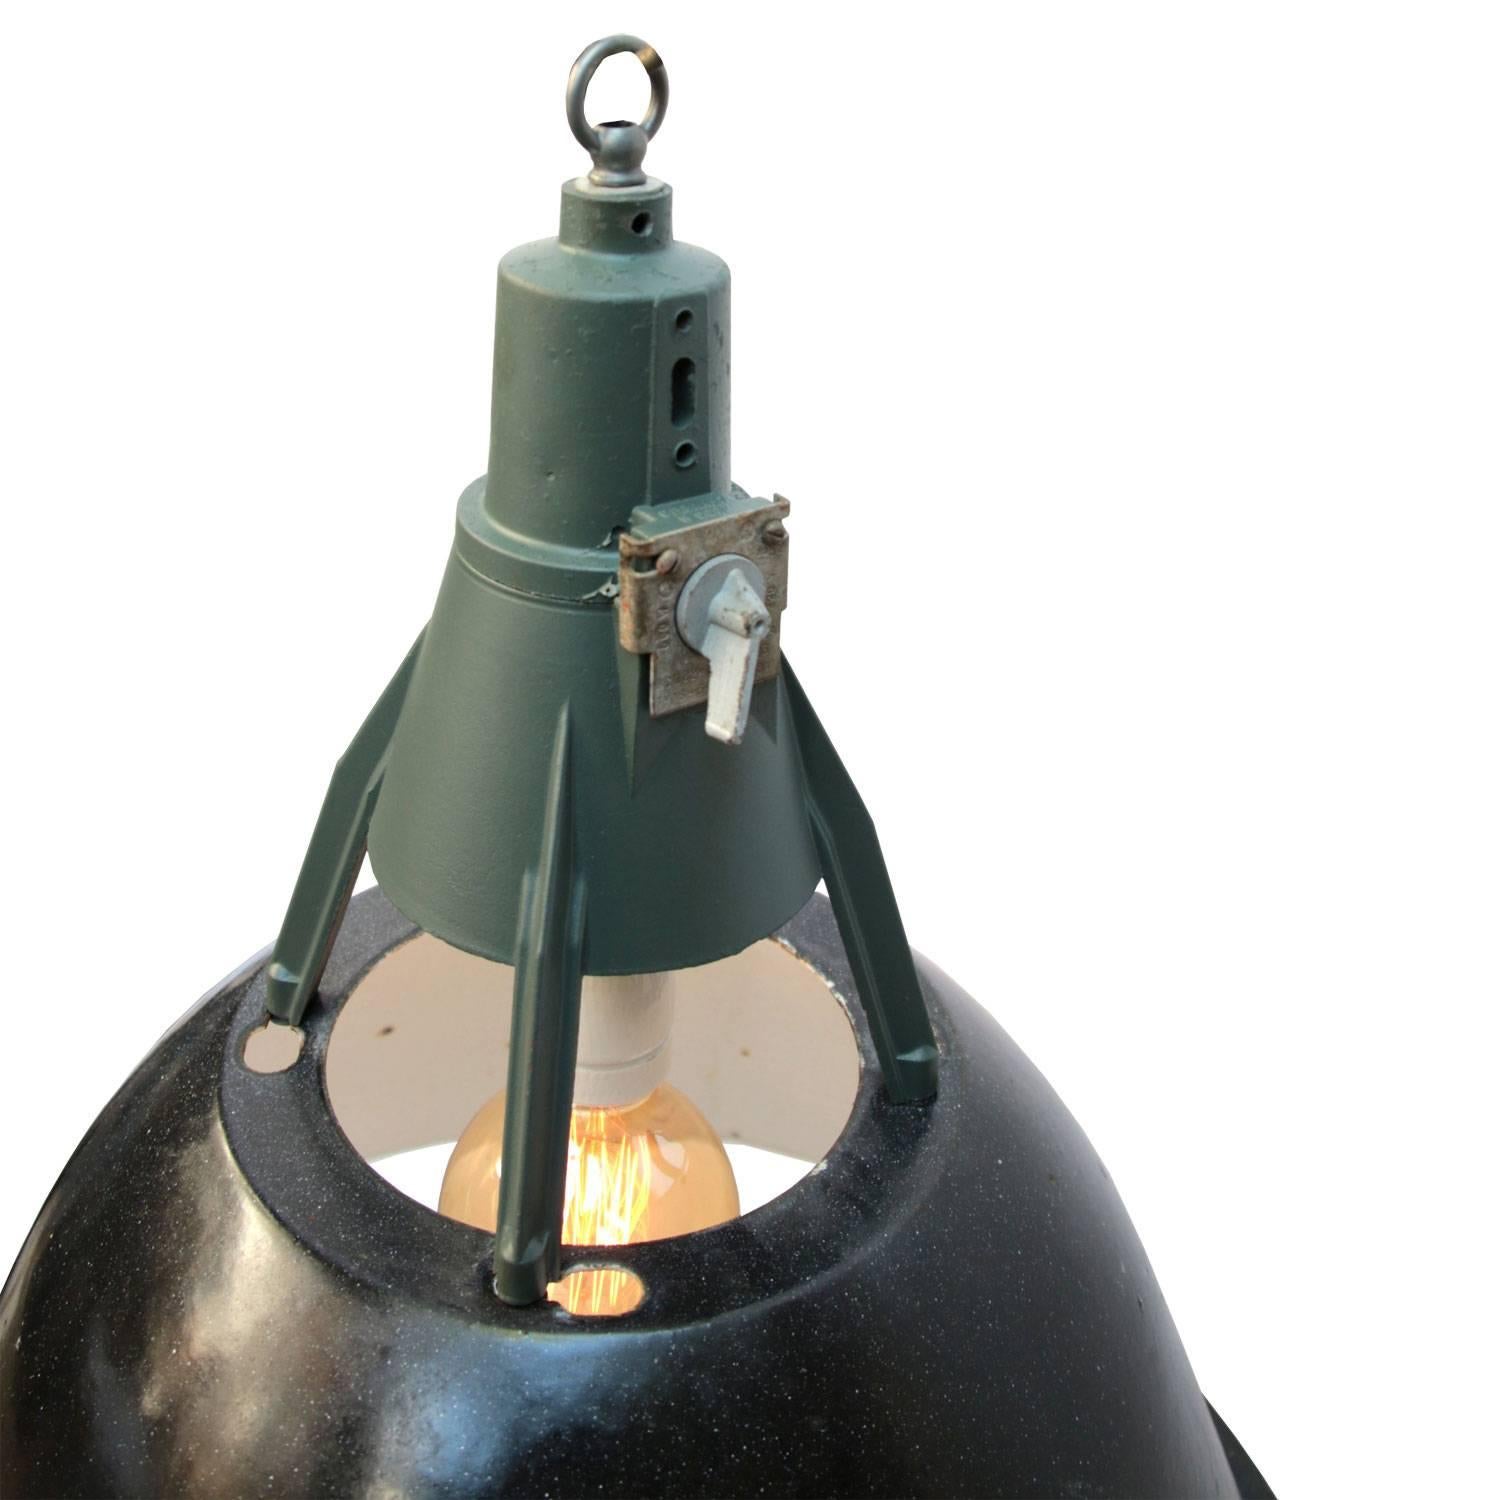 Busk Large Black . Enamel industrial pendant. Black enamel shade, white inside.
Dark grey/green cast aluminium top.

All lamps have been made suitable by international standards for incandescent light bulbs, energy-efficient and LED bulbs with an